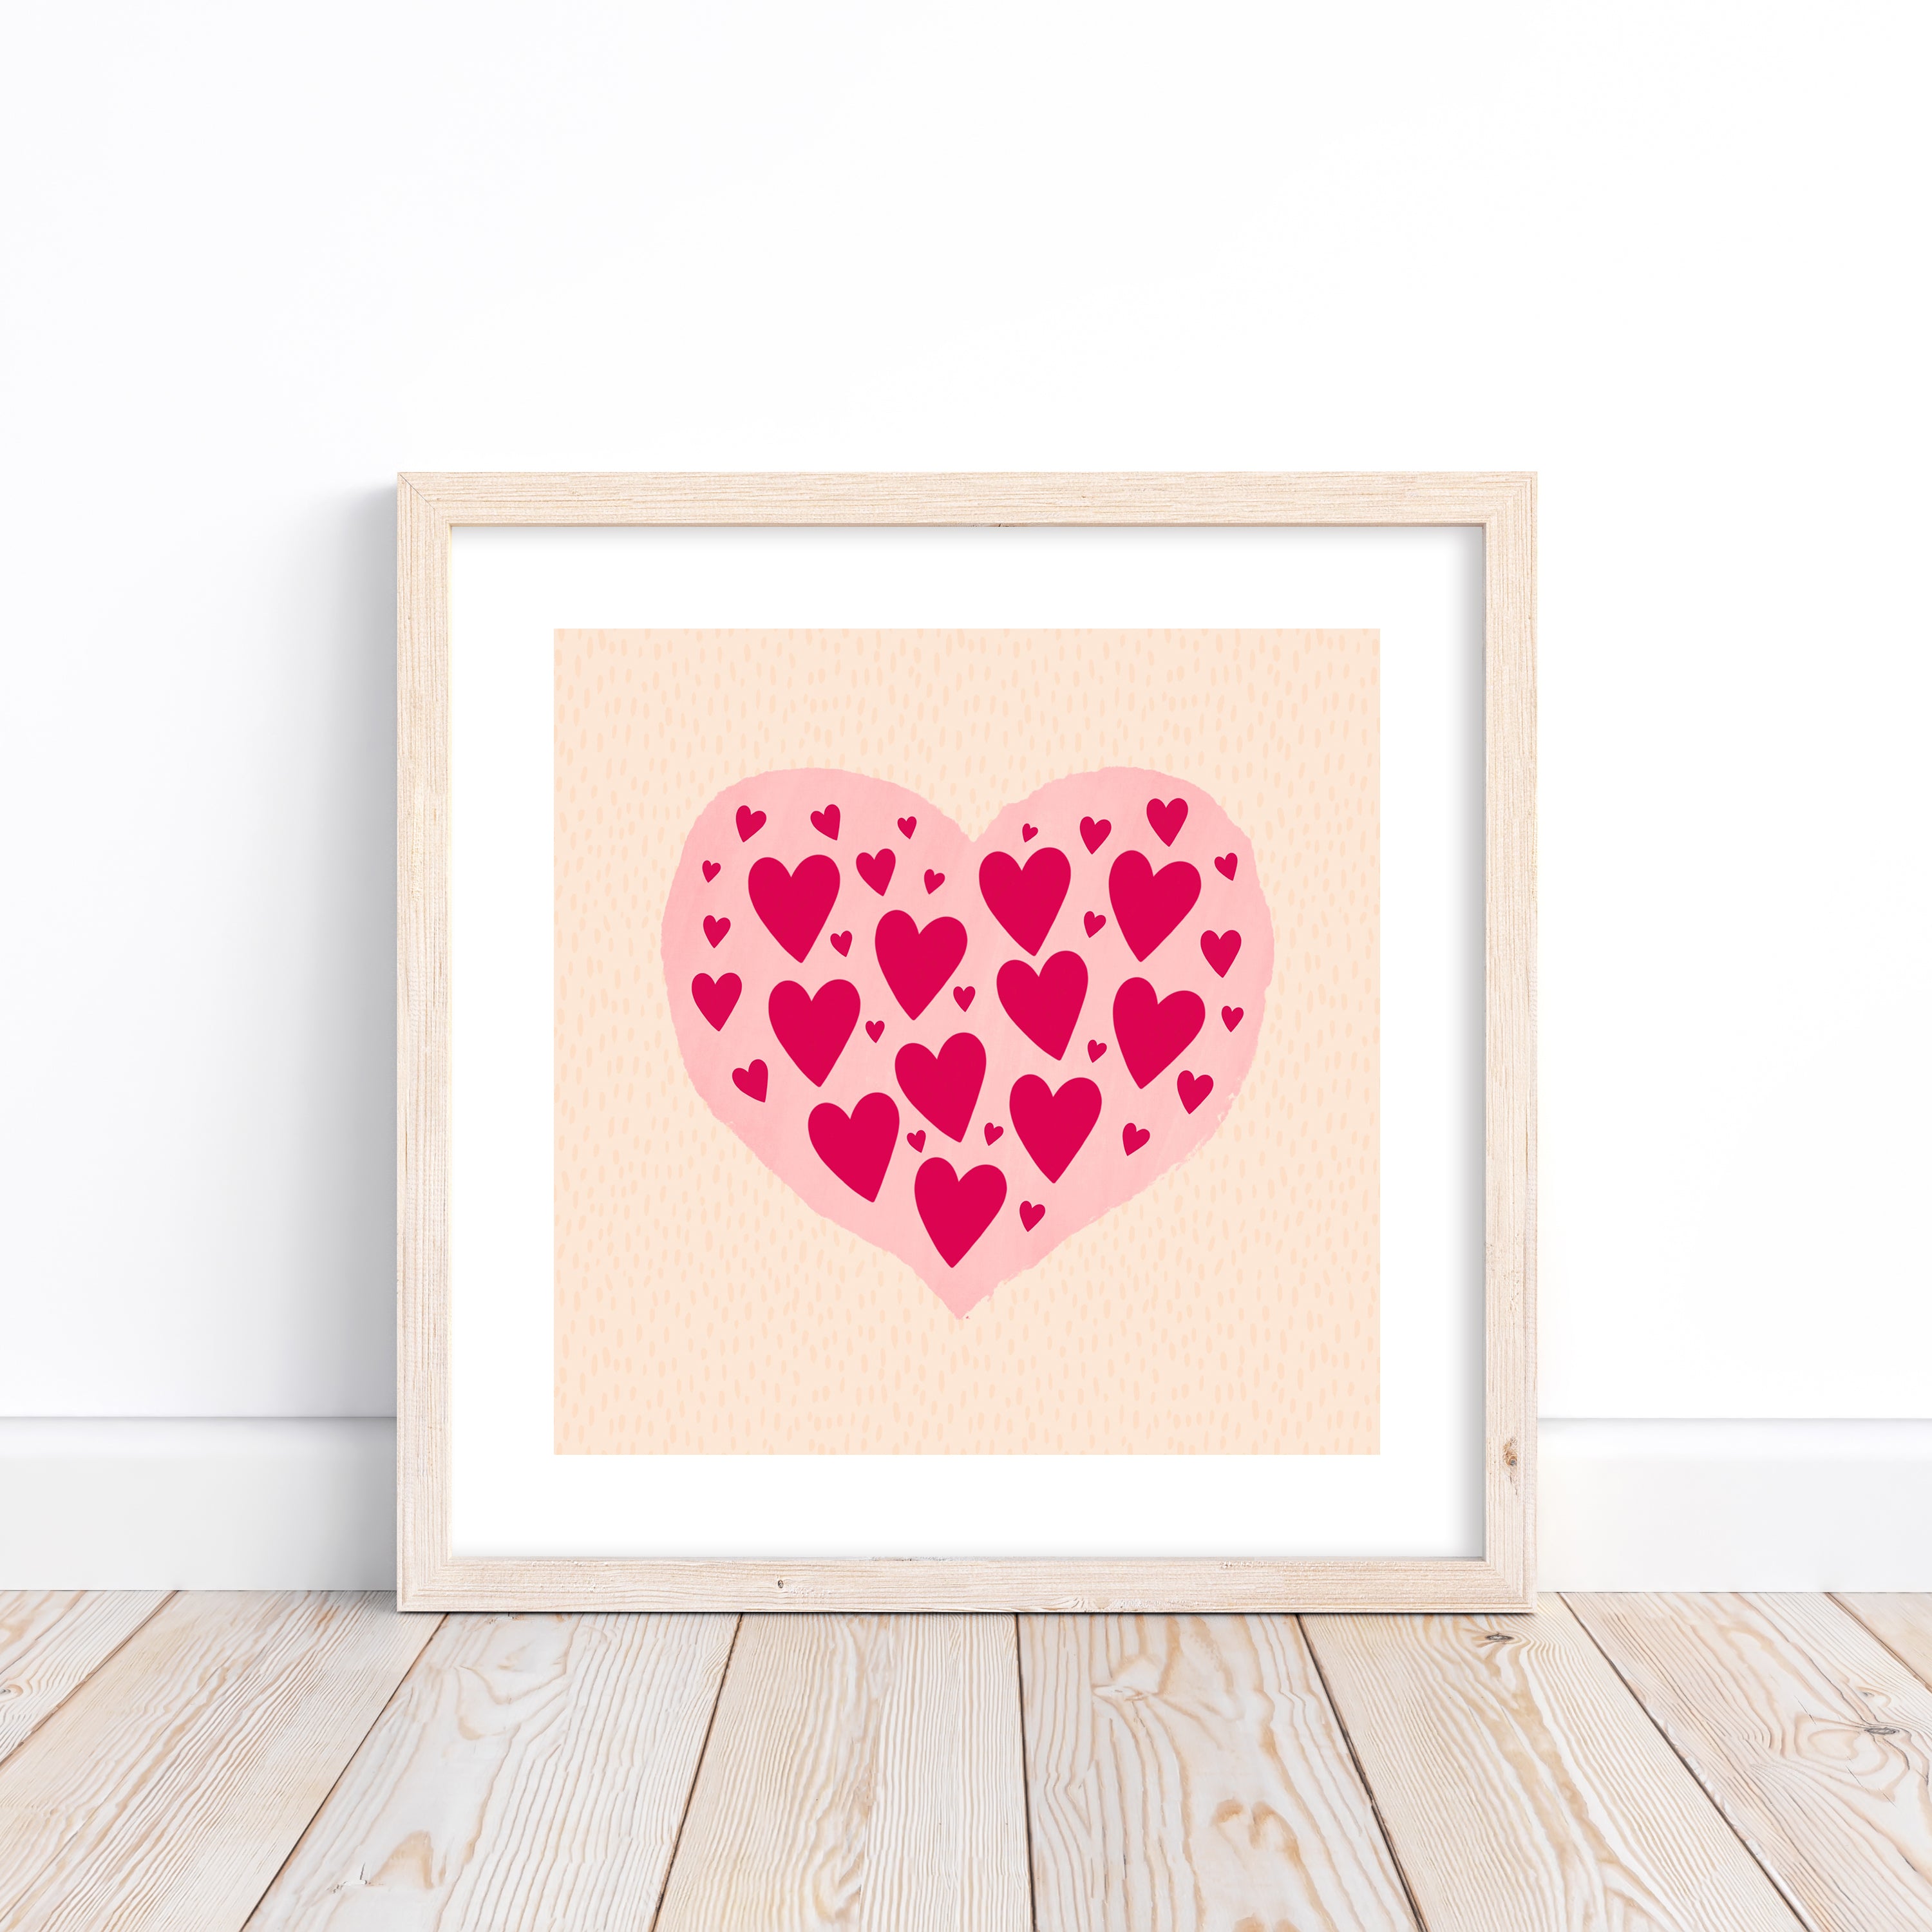 My Top 3 Valentine's Day Gift Choices | Irish Valentine's Gifts & Cards